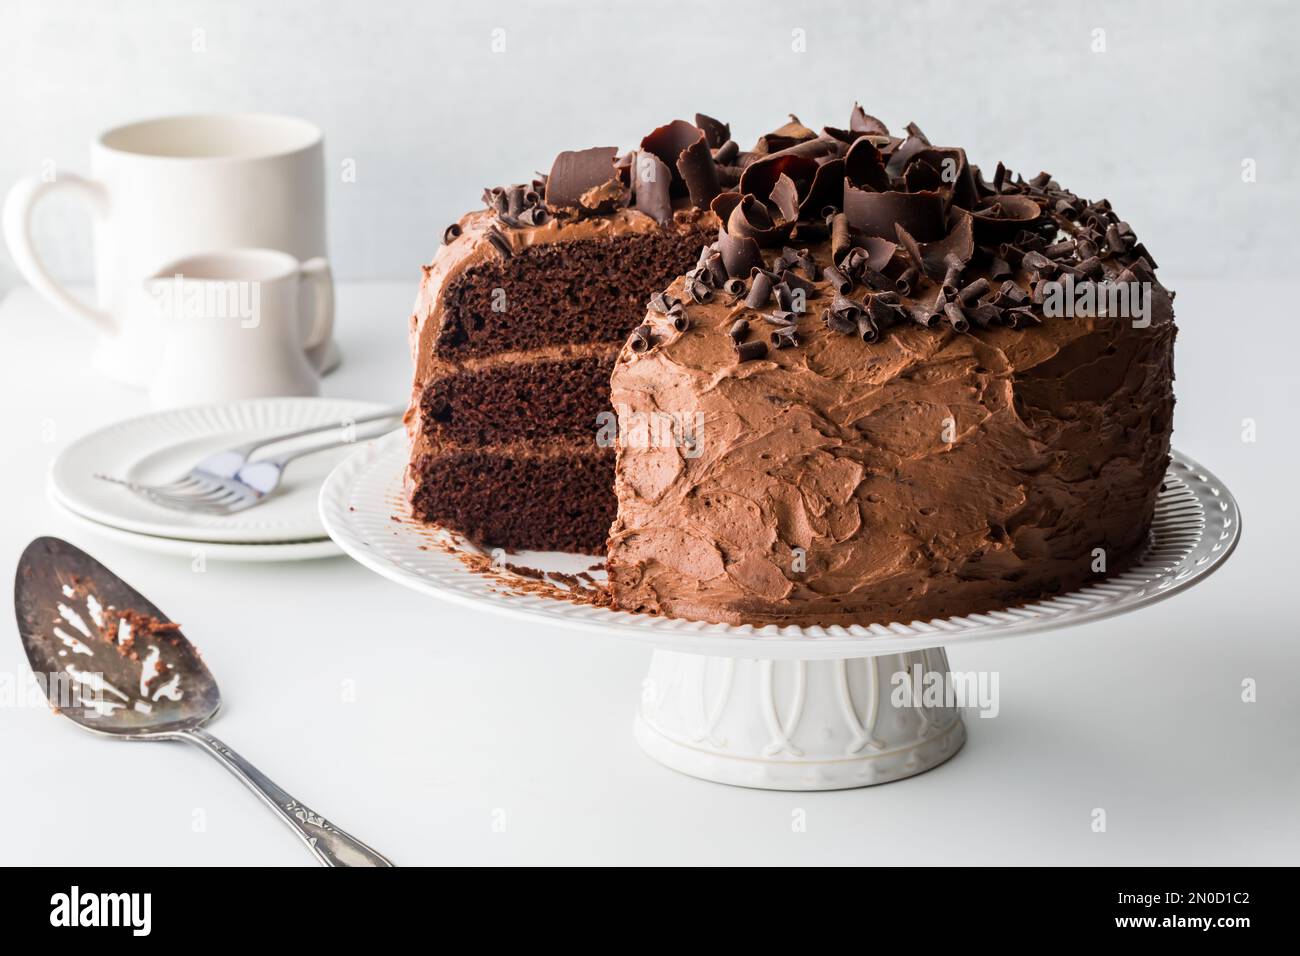 A triple layered chocolate cake with slices removed, against a light background. Stock Photo